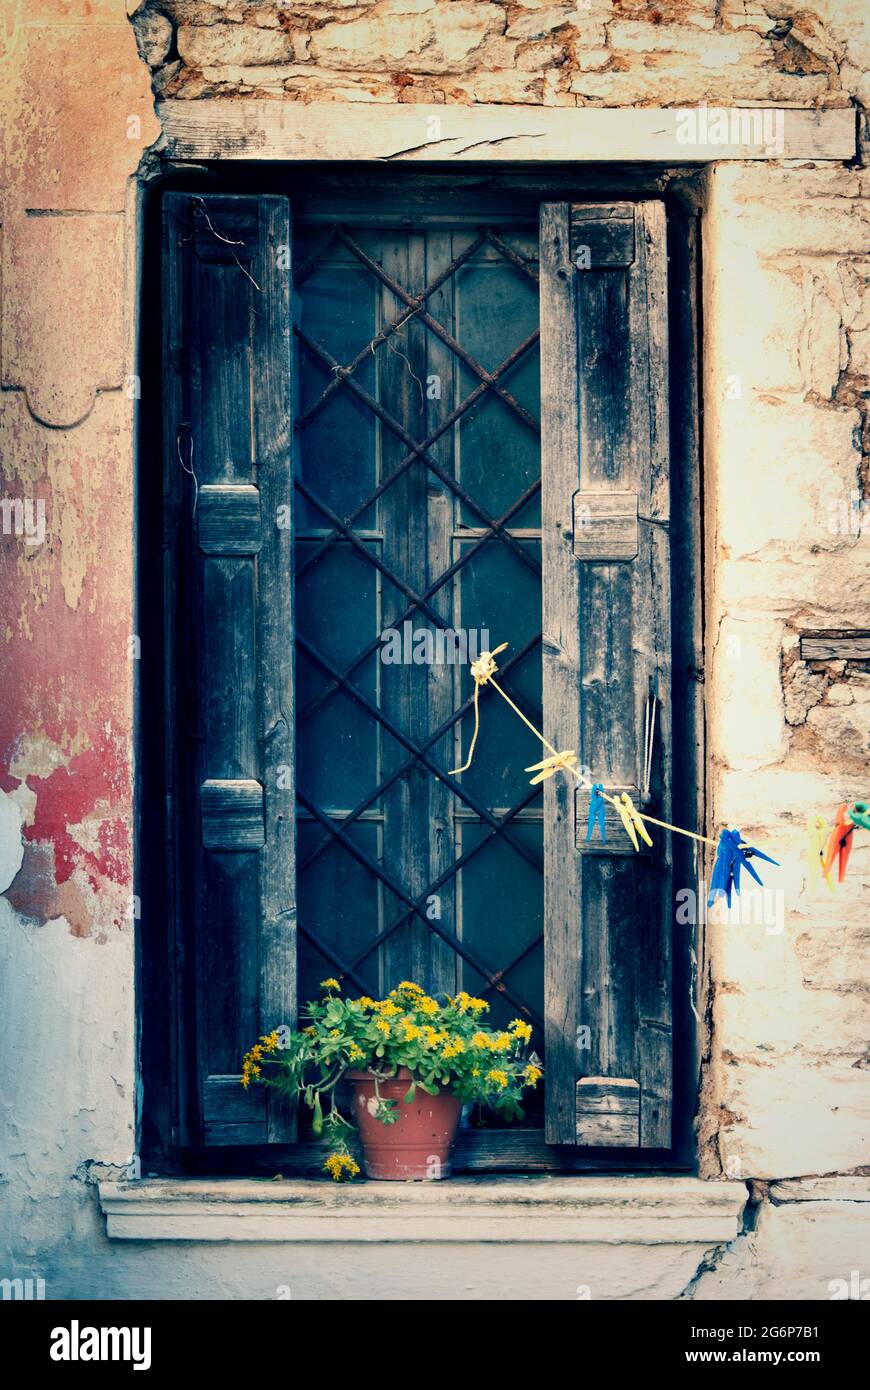 Old window with wooden shutters and clothesline Stock Photo